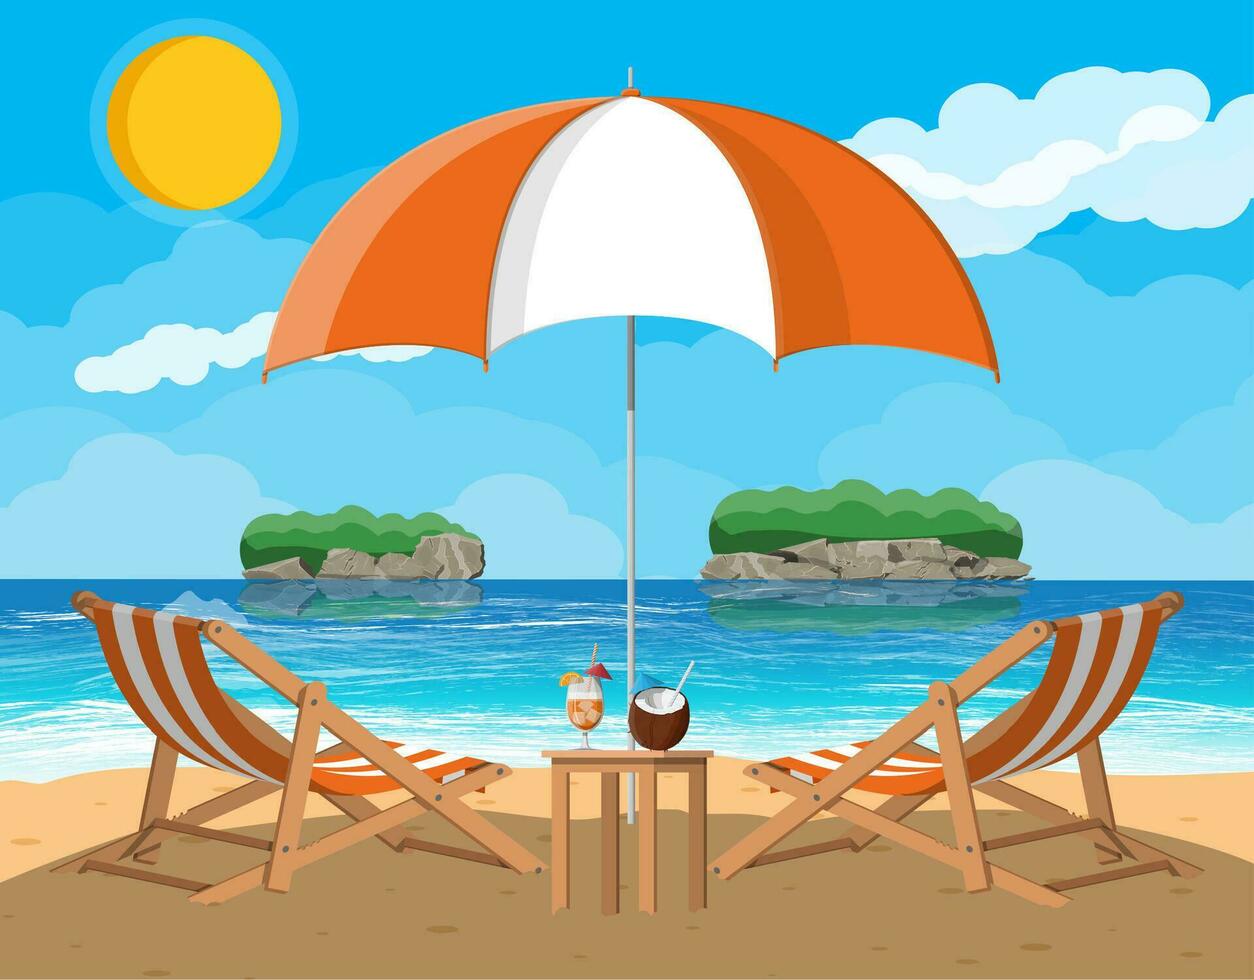 Landscape of wooden chaise lounge, umbrella, table with coconut and cocktail on beach. Sun with reflection in water and clouds. Day in tropical place. Vector illustration in flat style